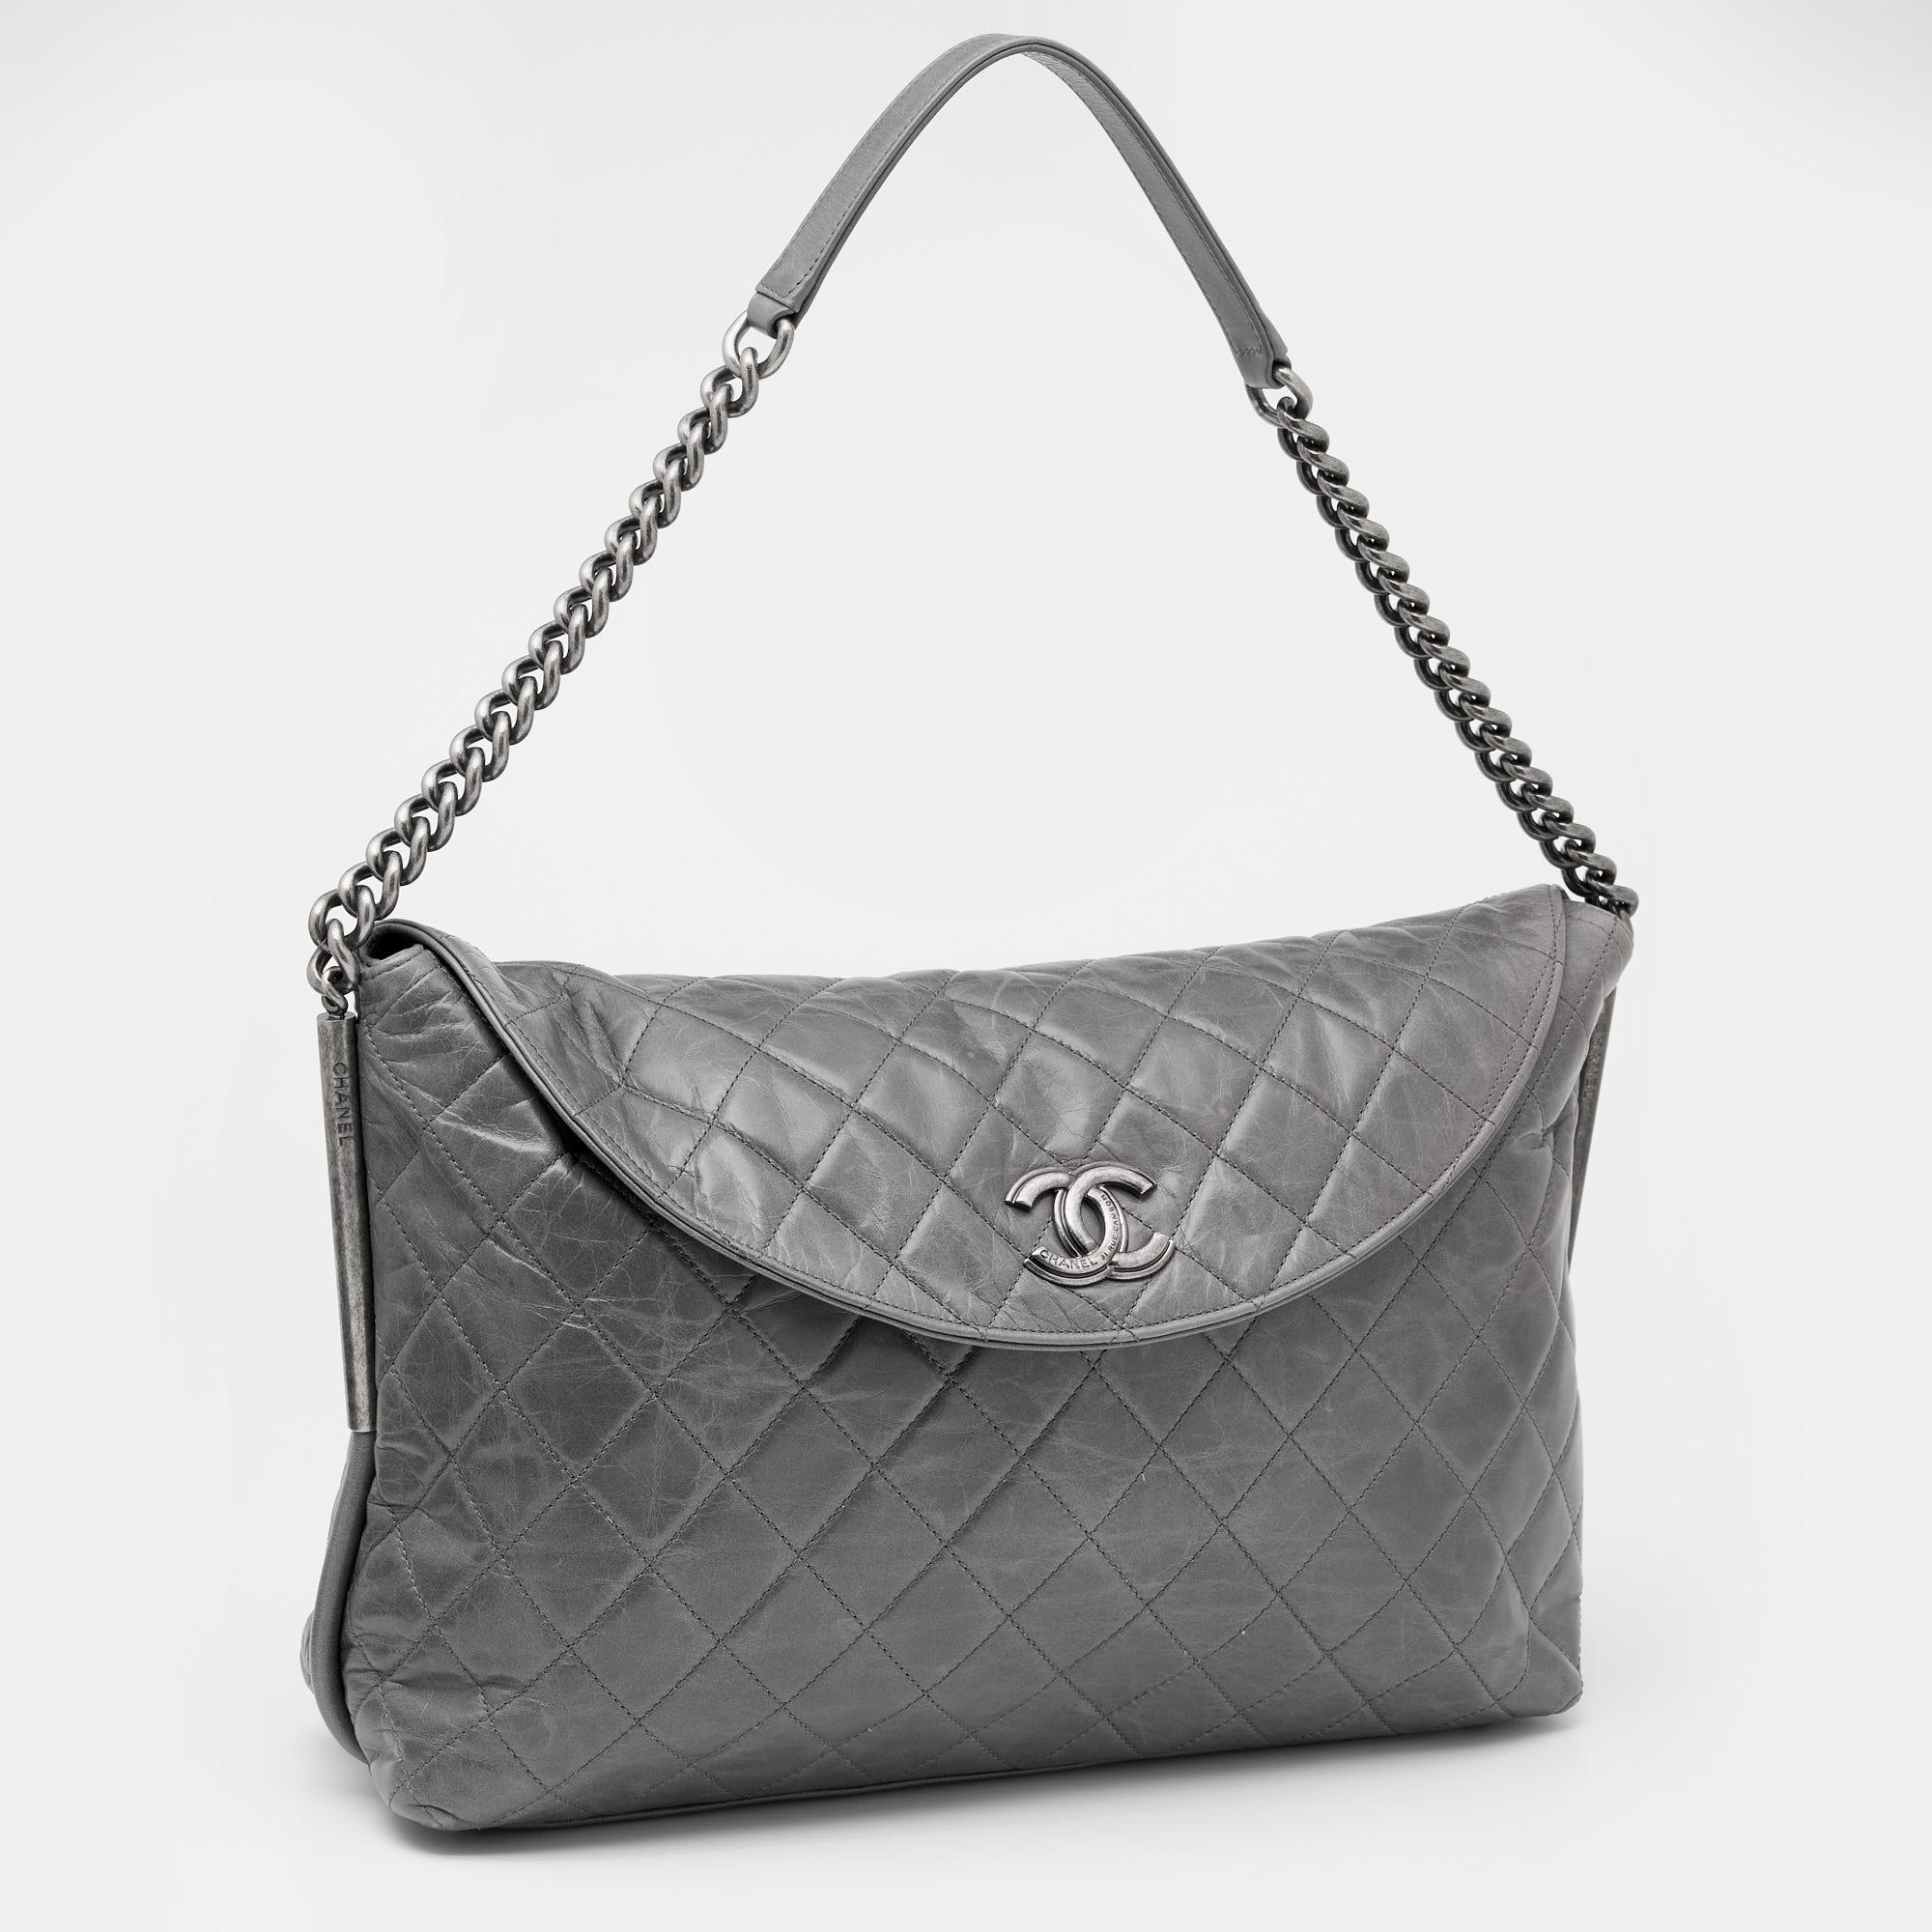 Gray Chanel Grey Quilted Leather Shoulder Bag